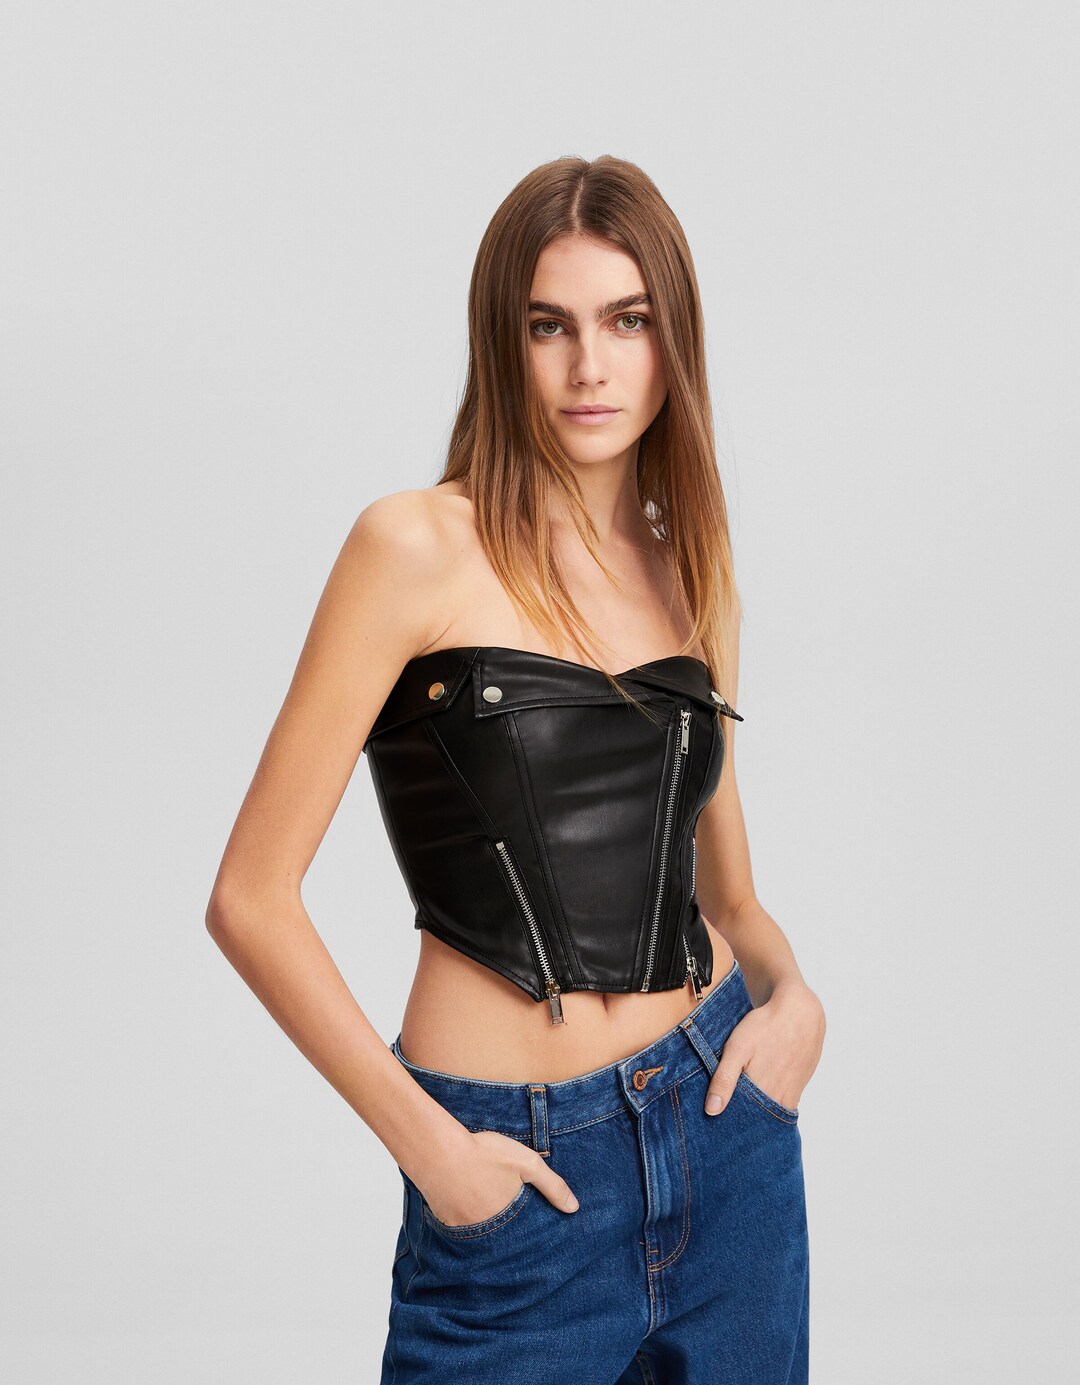 Faux leather cropped bustier top with zippers